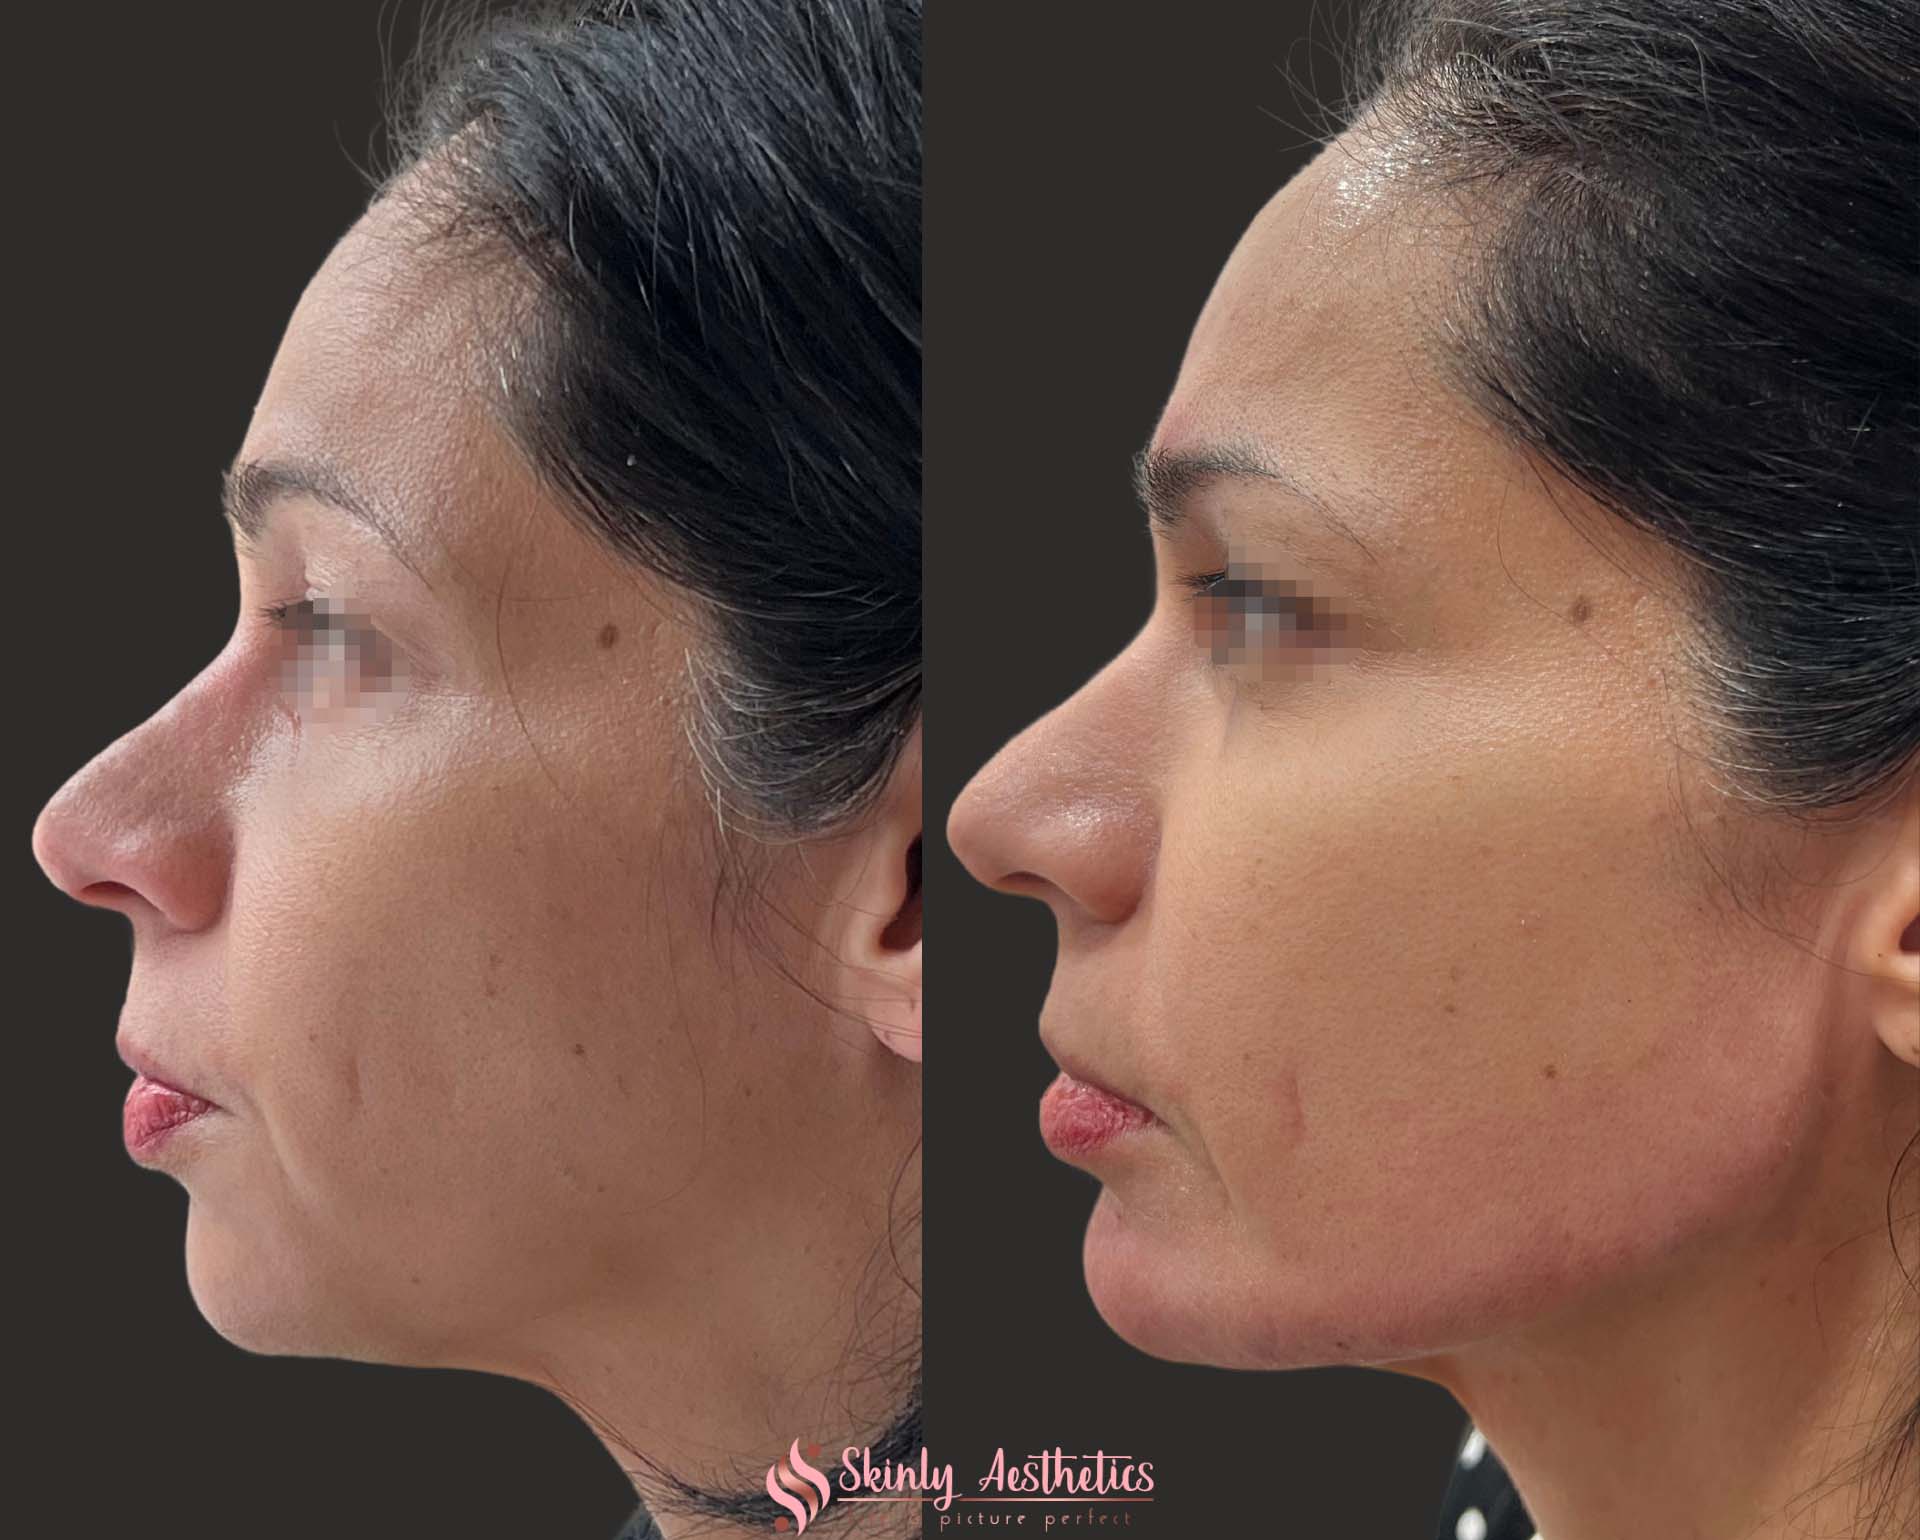 before and after results following jawline and chin augmentation with Radiesse and Juvederm Voluma dermal fillers